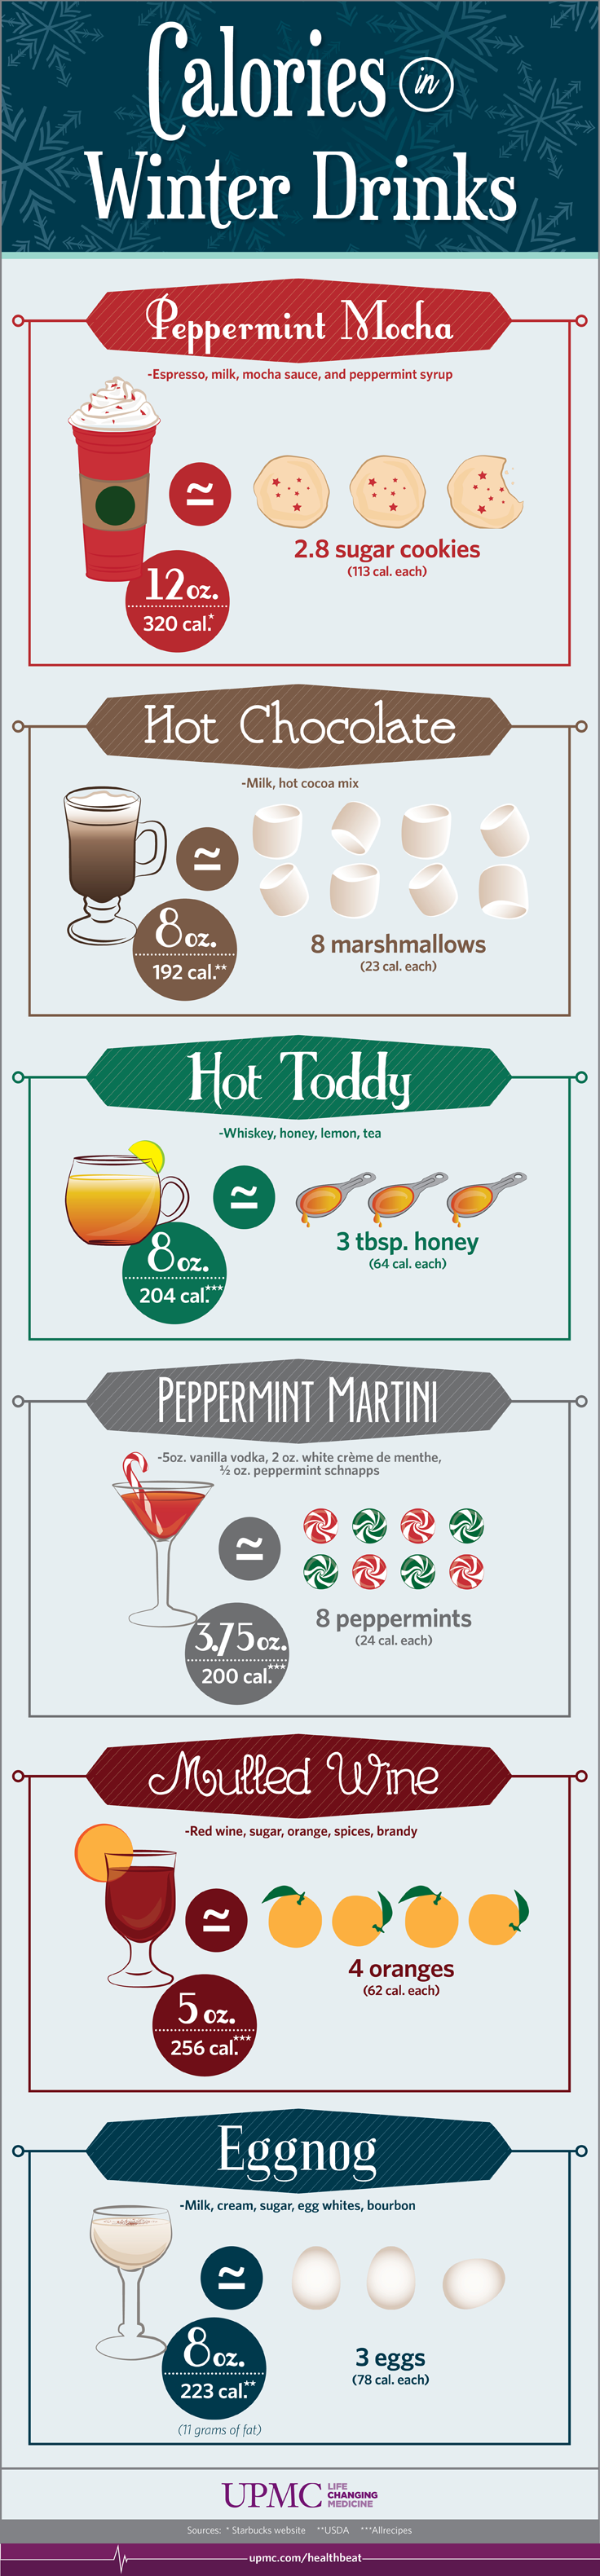 Discover the calories in your favorite winter drinks so you can make better decisions this holiday season.